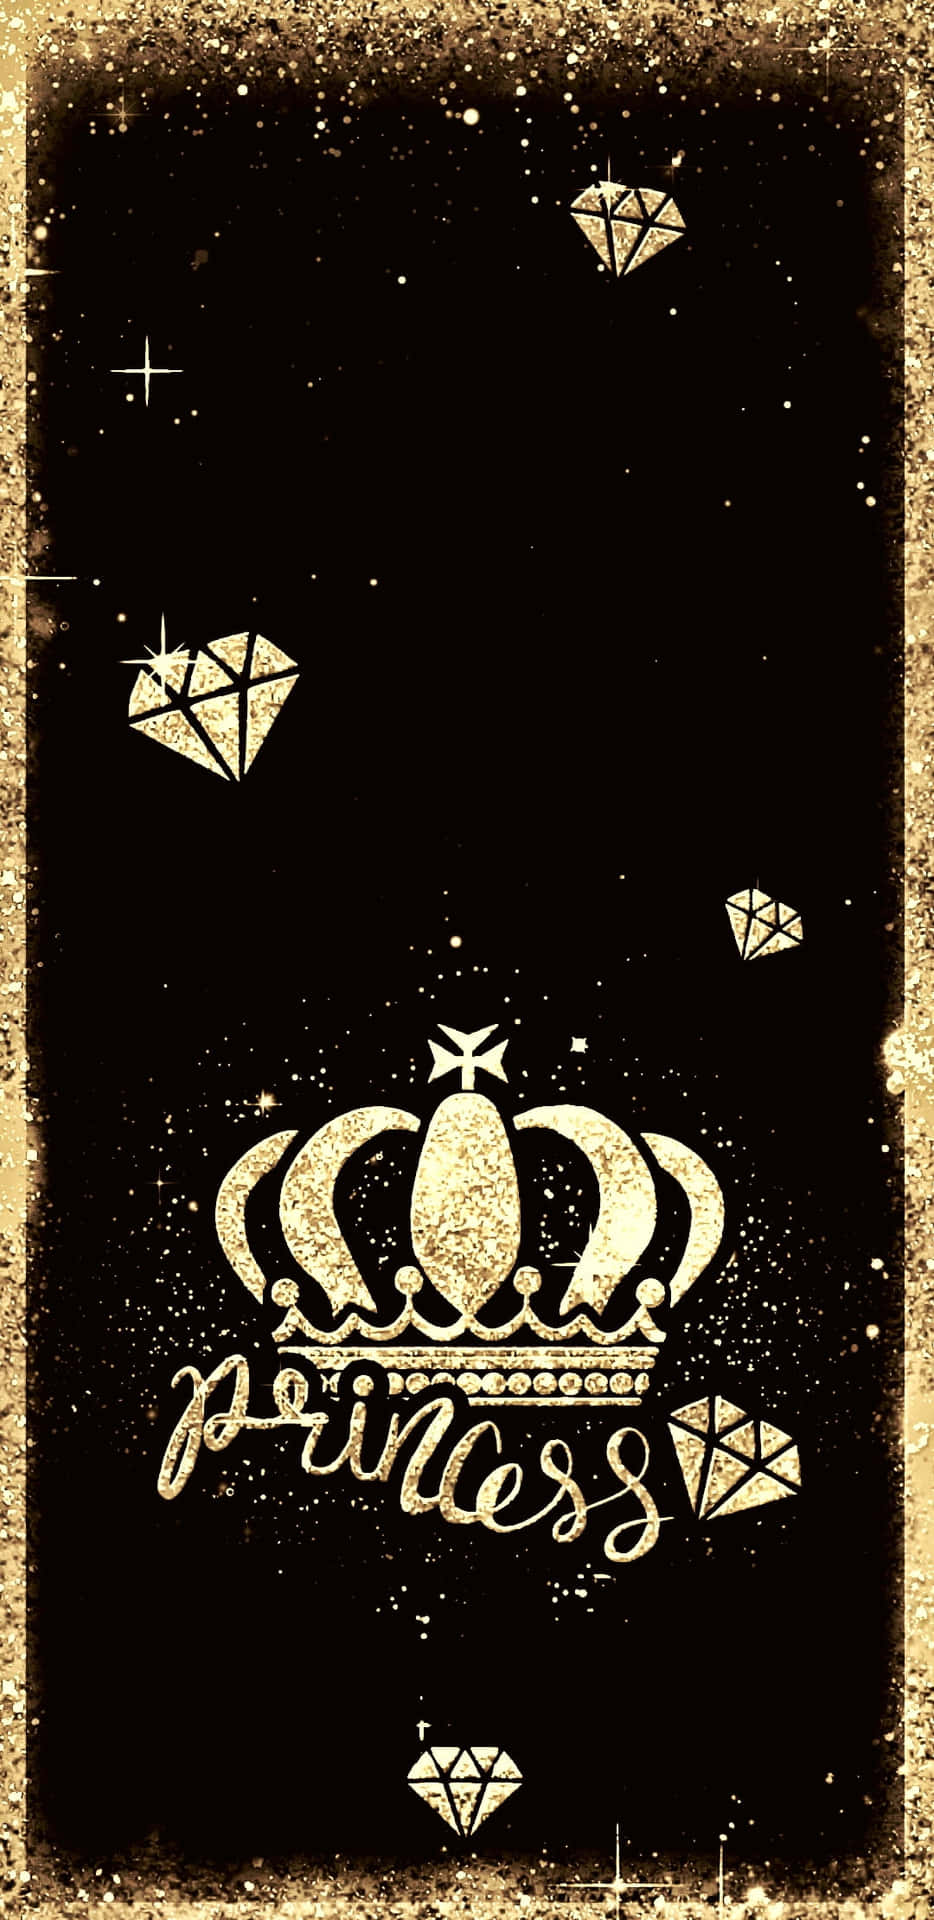 Shine Bright With A Golden Princess Crown! Background